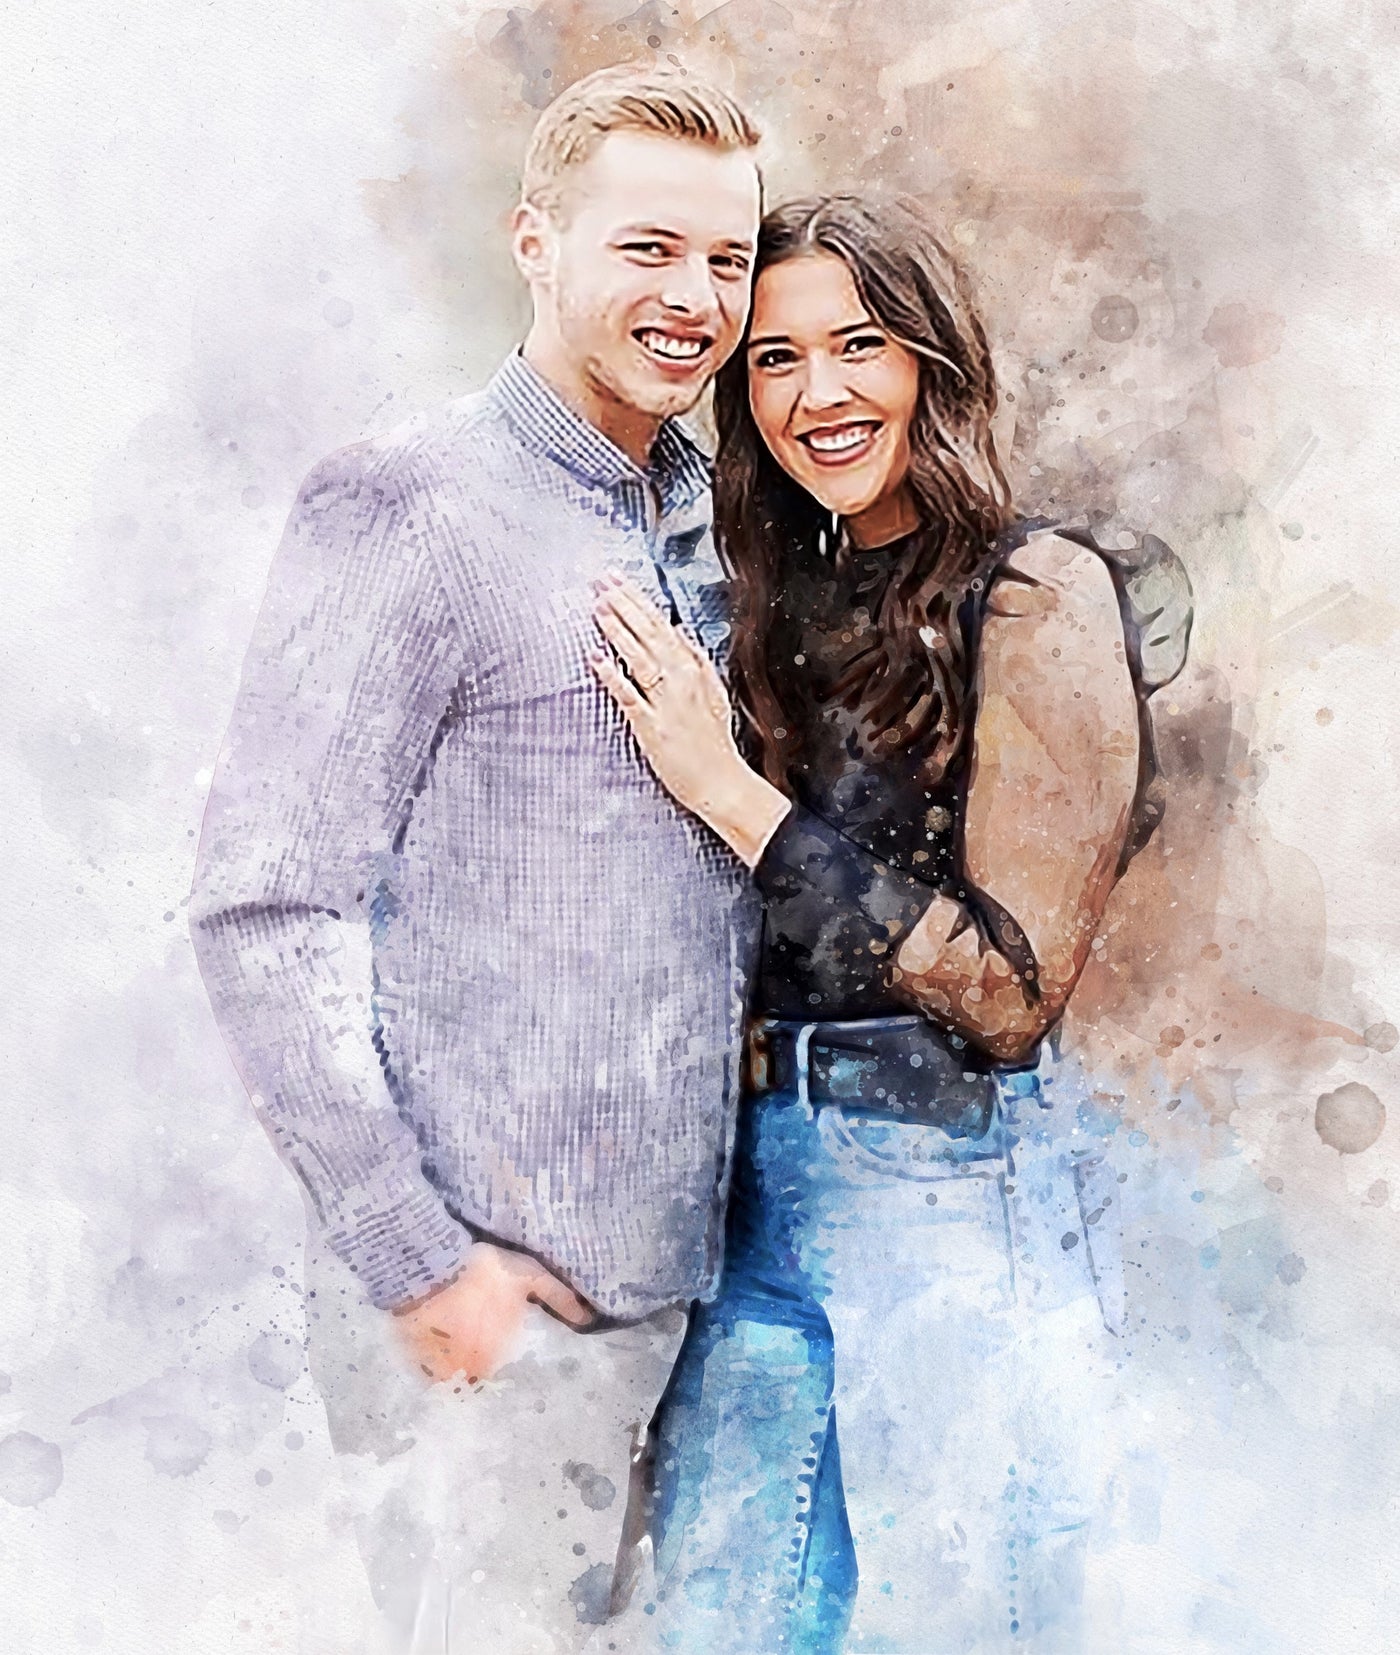 Custom portrait of the couple, Wedding day gift for bride and groom, Family Portrait from photo, Memory Gift, Photo Gifts